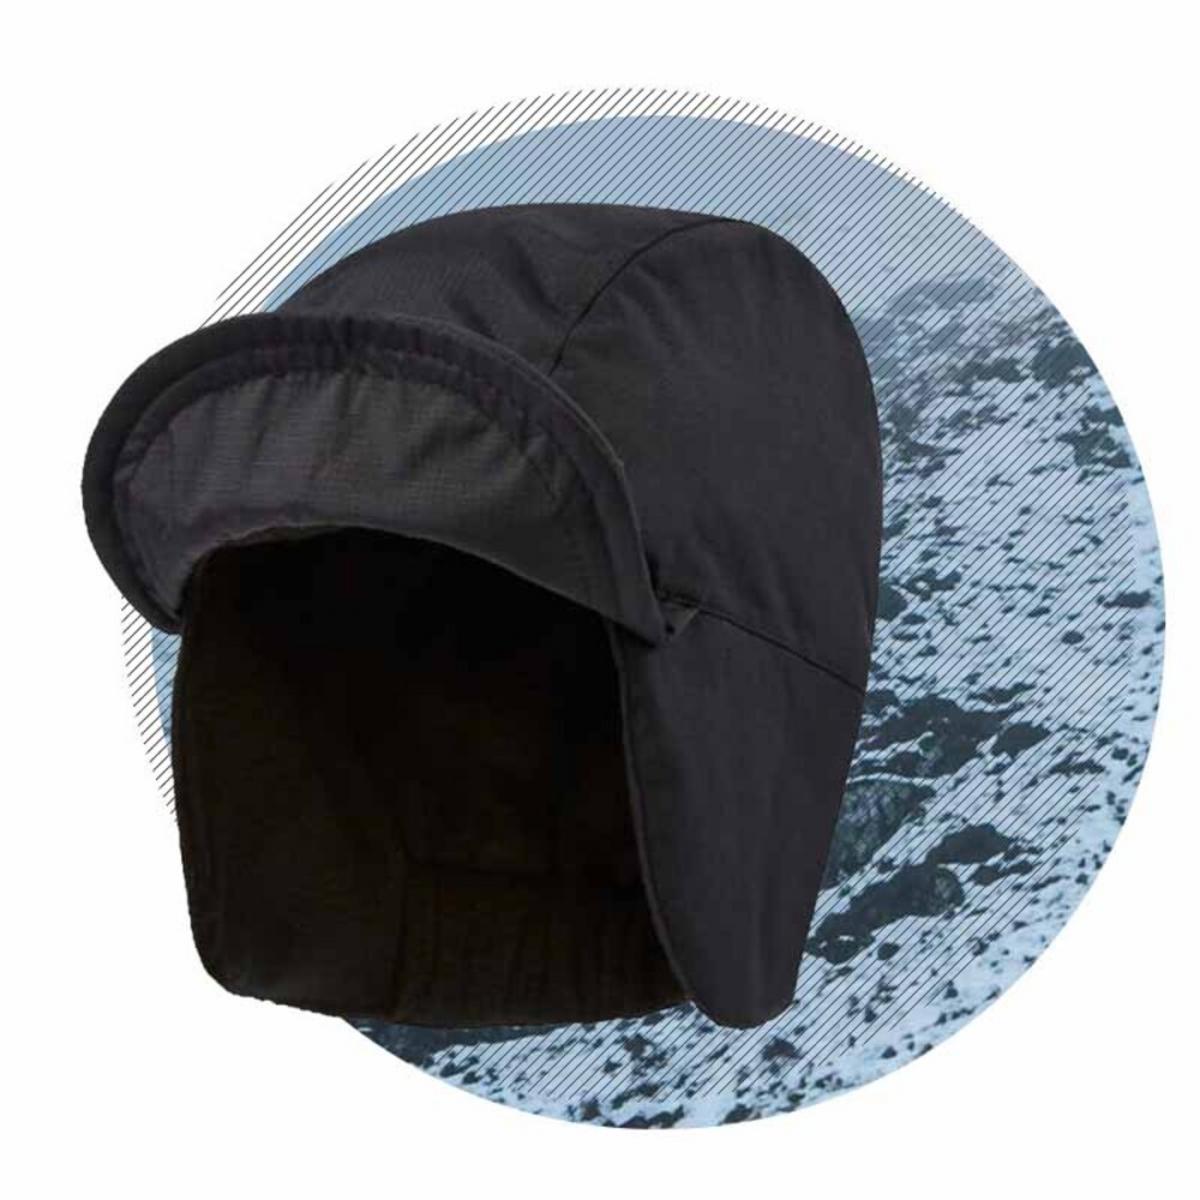 SealSkinz Kirstead Waterproof Extreme Cold Weather Hat